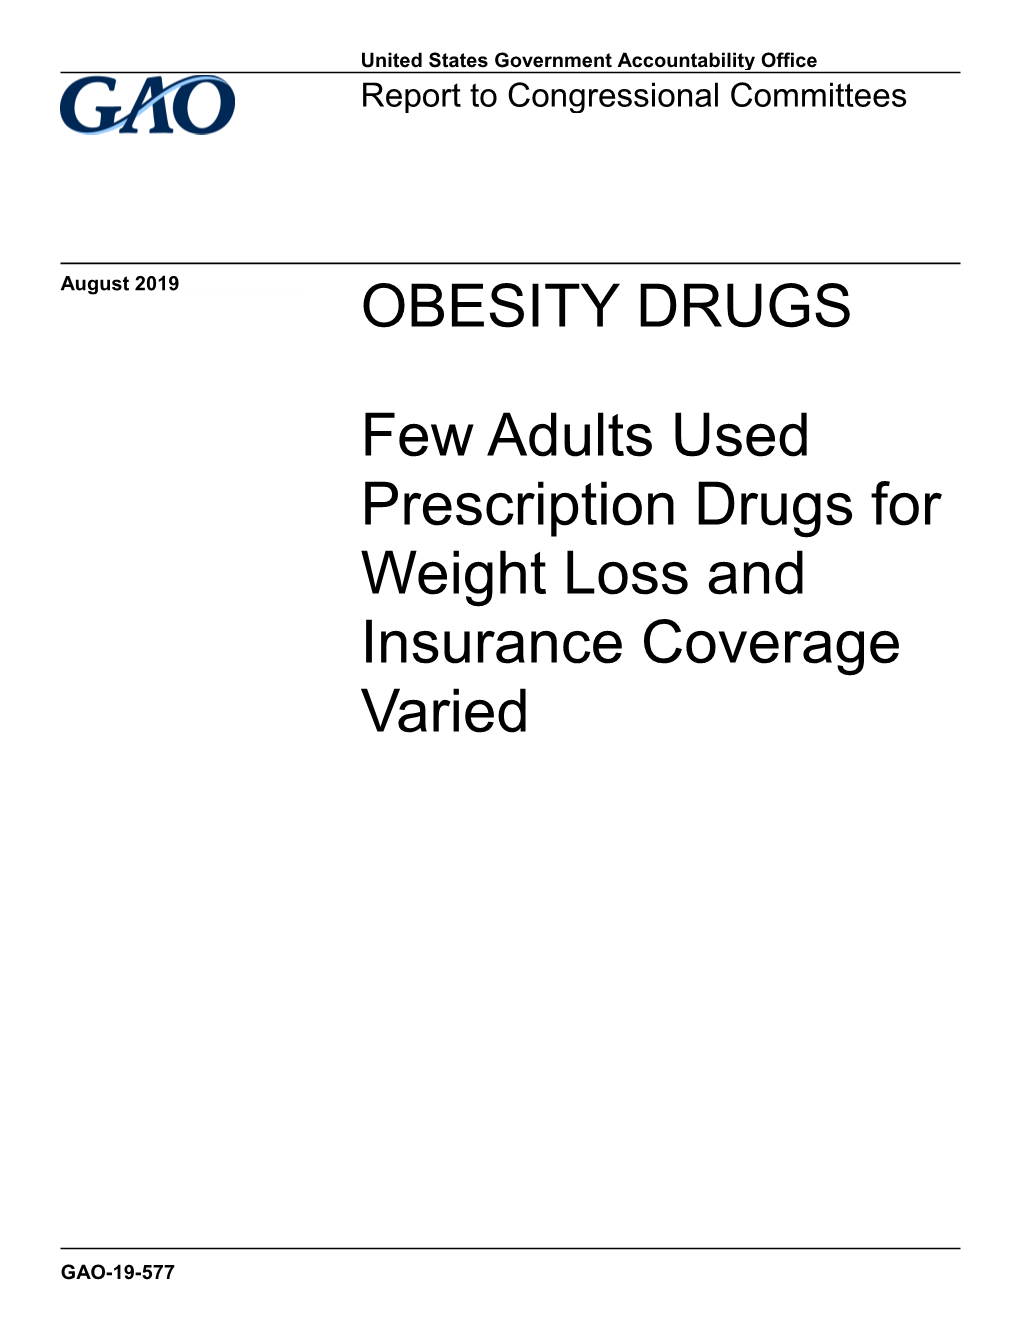 Few Adults Used Prescription Drugs for Weight Loss and Insurance Coverage Varied